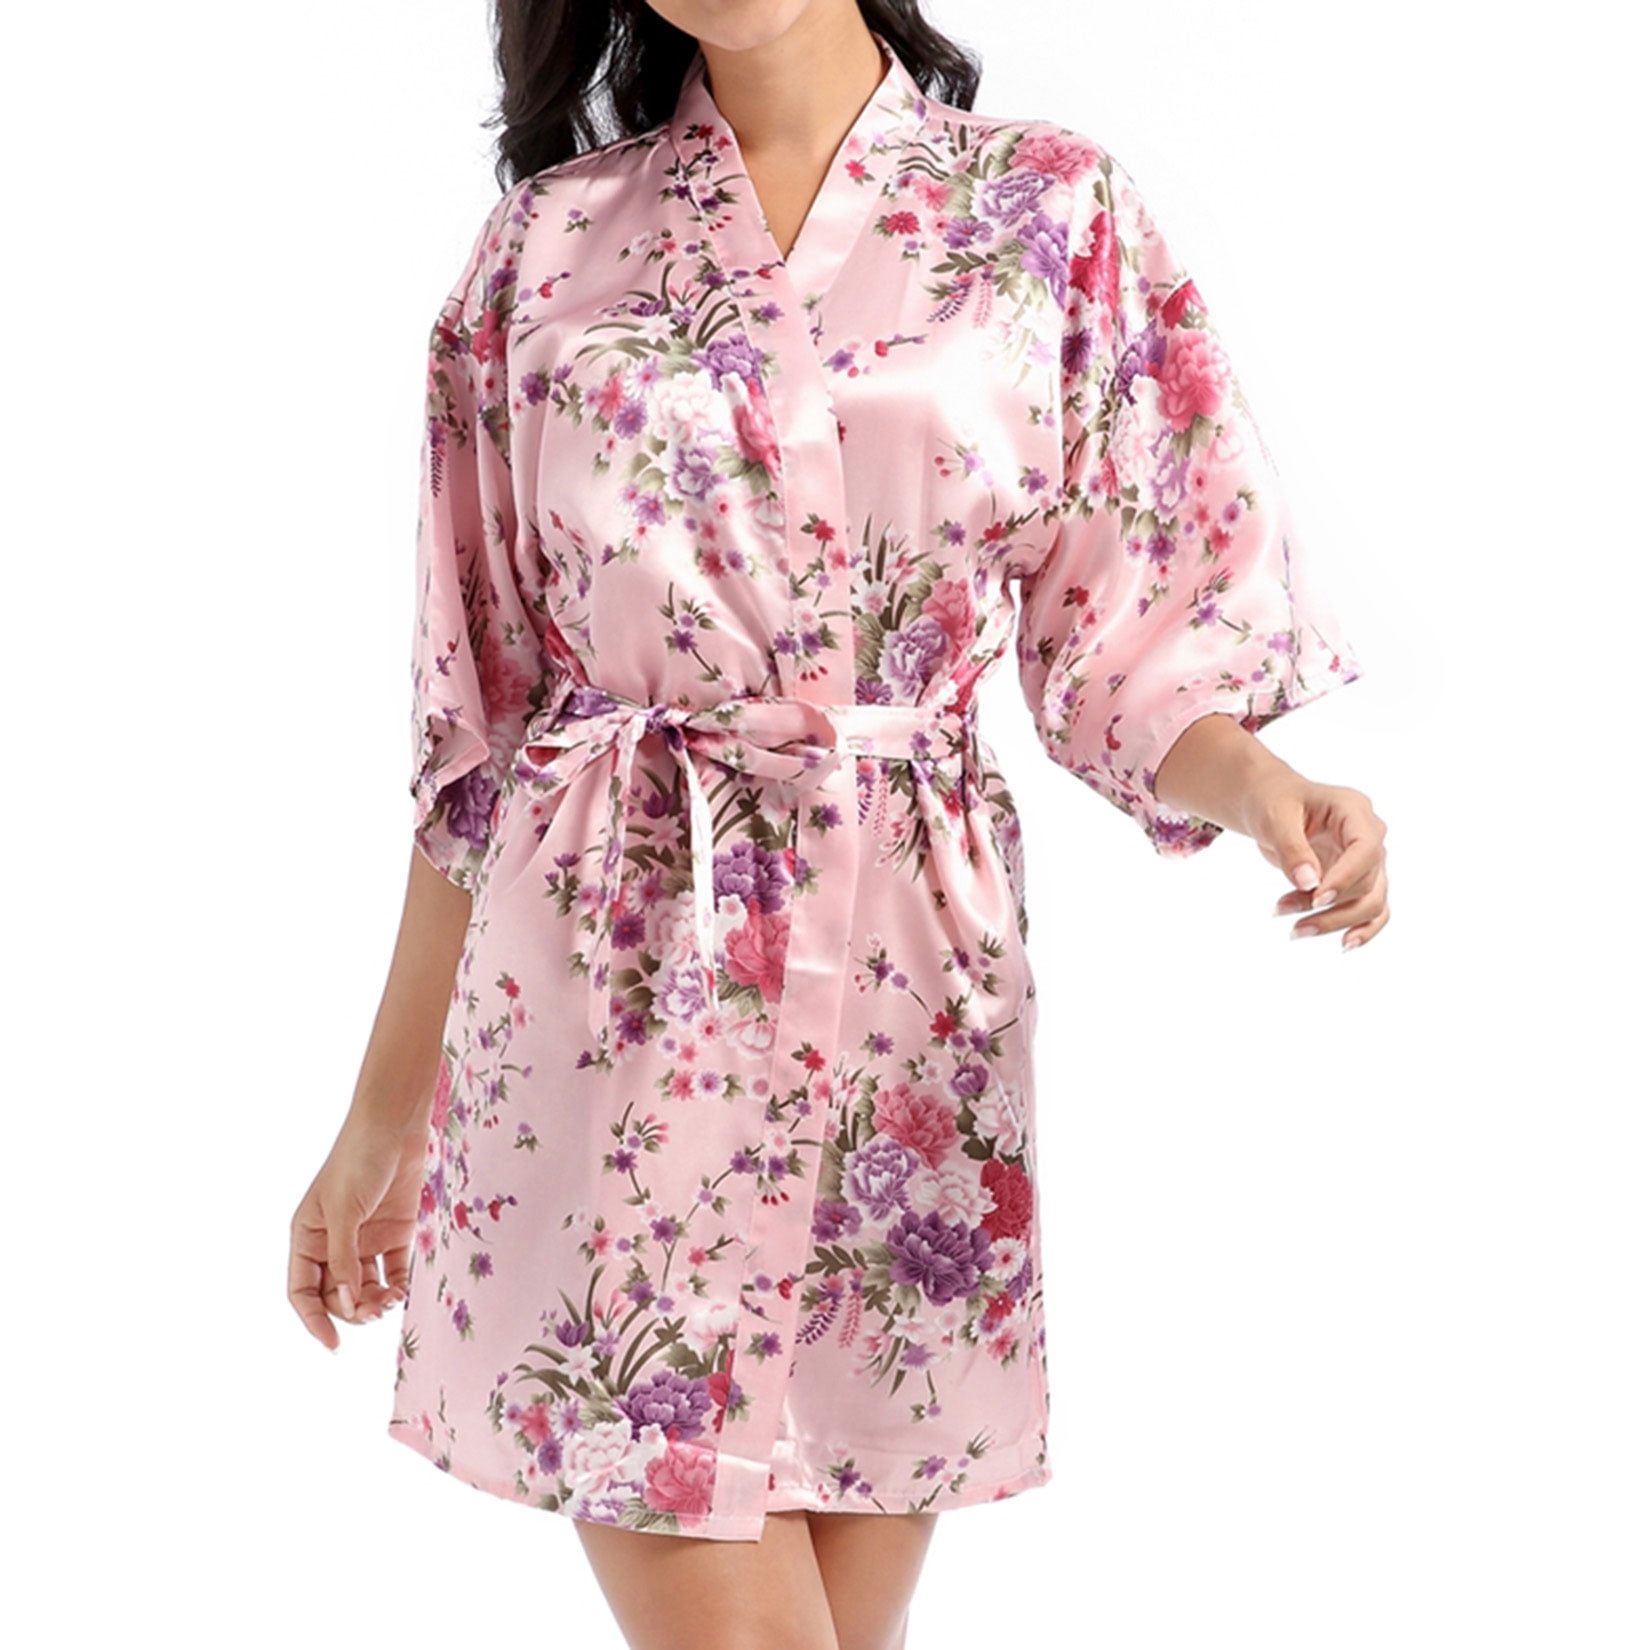 gakvov Satin Nightgowns For Women Lace Patchwork Satin Pajamas Long Robes  Lingerie Gown Deep V Neck Wedding Nightdress Sleepwear